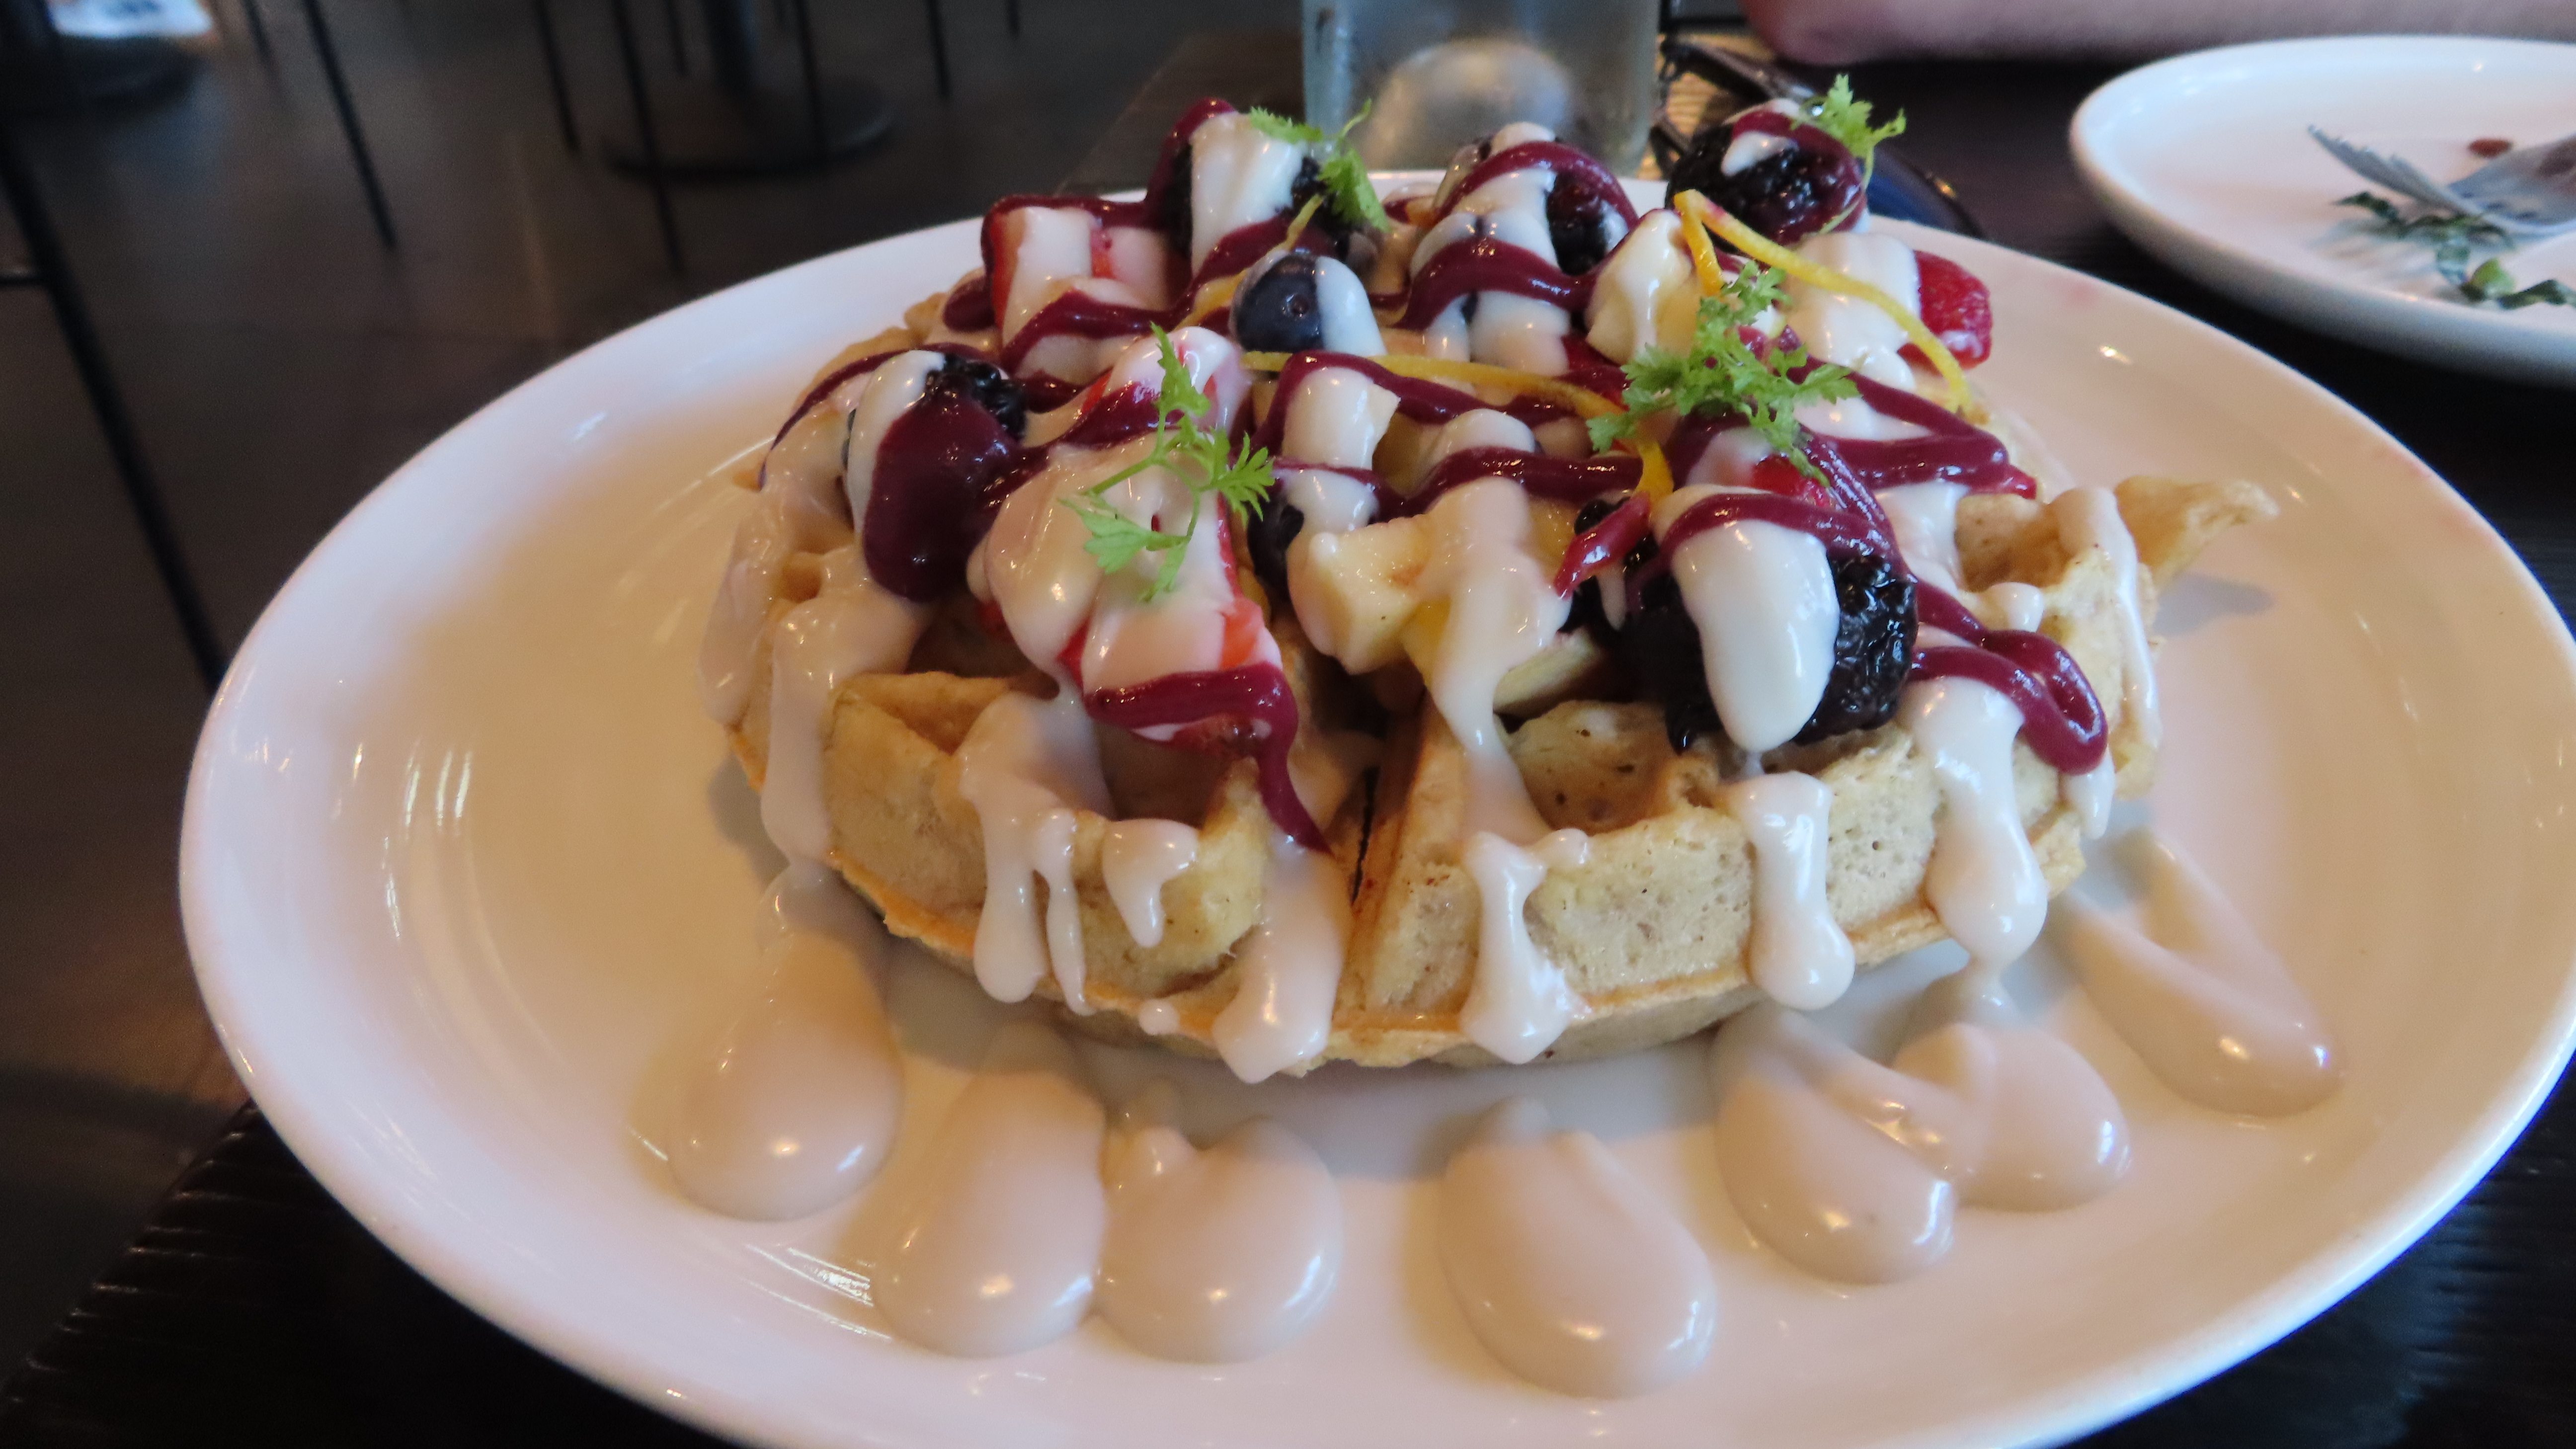 The sloppy waffle with vanilla cream and berry sauce. There are blackberries, blueberries and strawberries. The waffle made from regular and oat flour sits on a white plate.